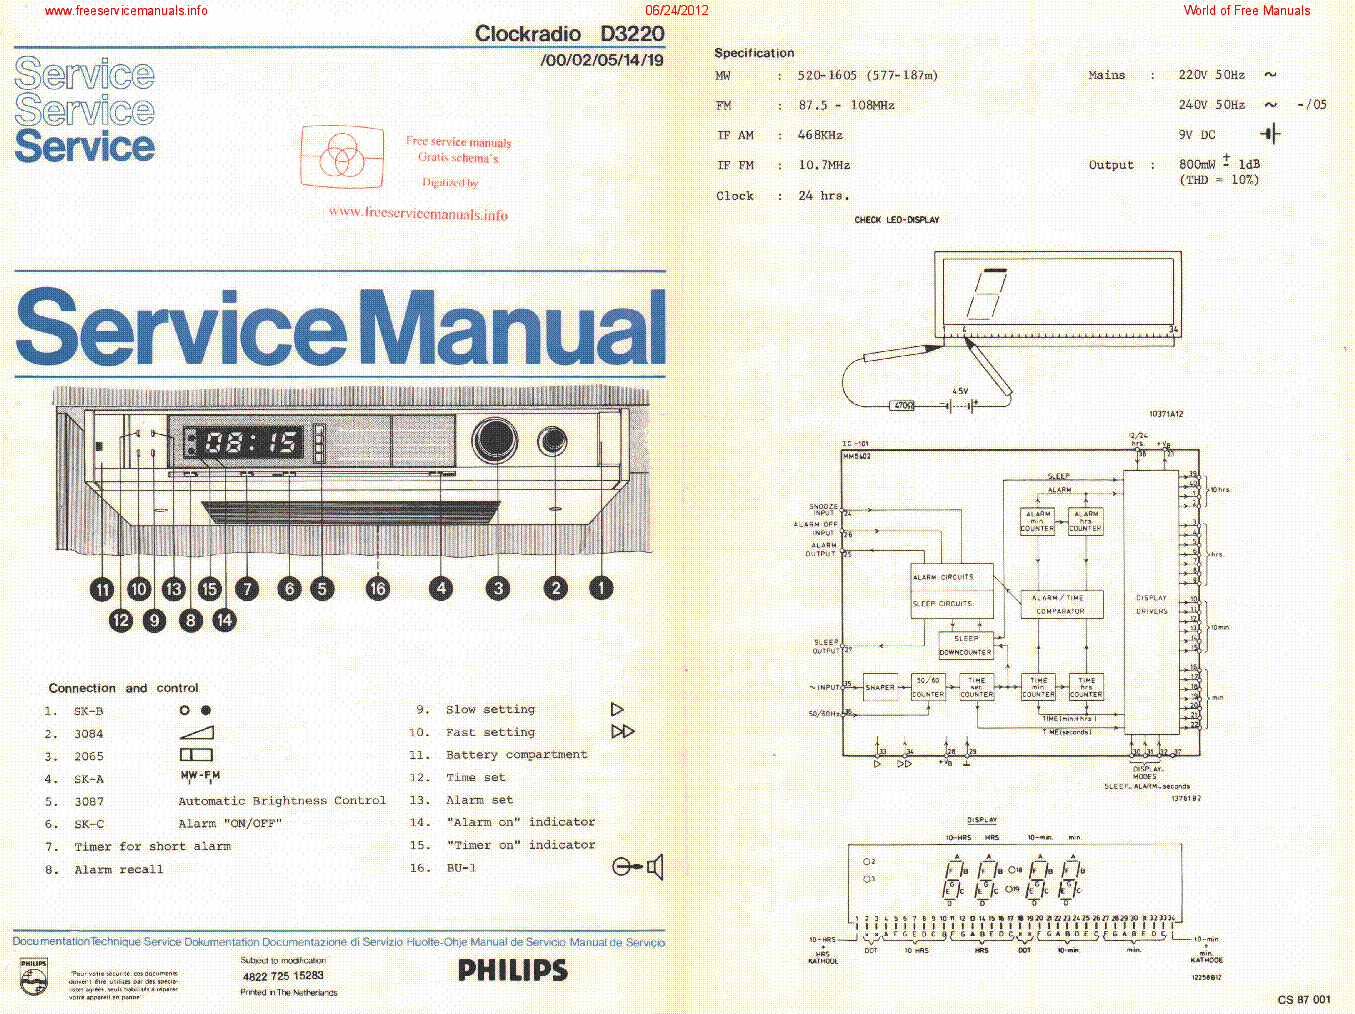 PHILIPS D3220 service manual (1st page)